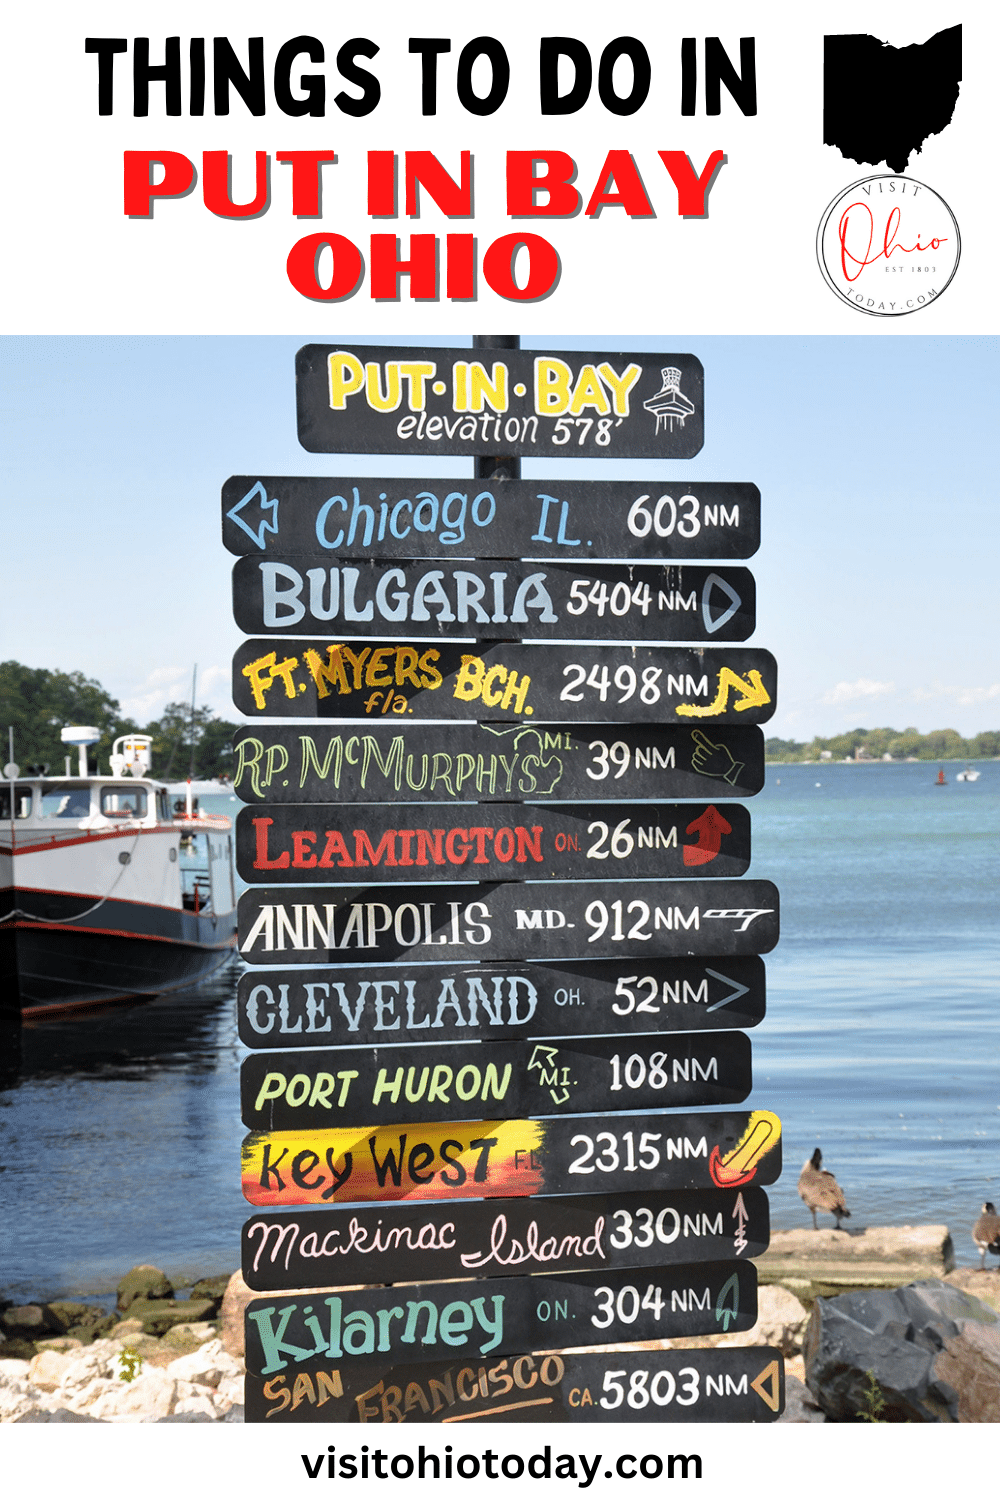 Located on South Bass Island, it may be small, but there is a huge variety of things to do in Put in Bay. One of the Lake Erie islands, it is by far the most visited, attracting more than half a million visitors each year. The island is served by ferry from Port Clinton and Sandusky.